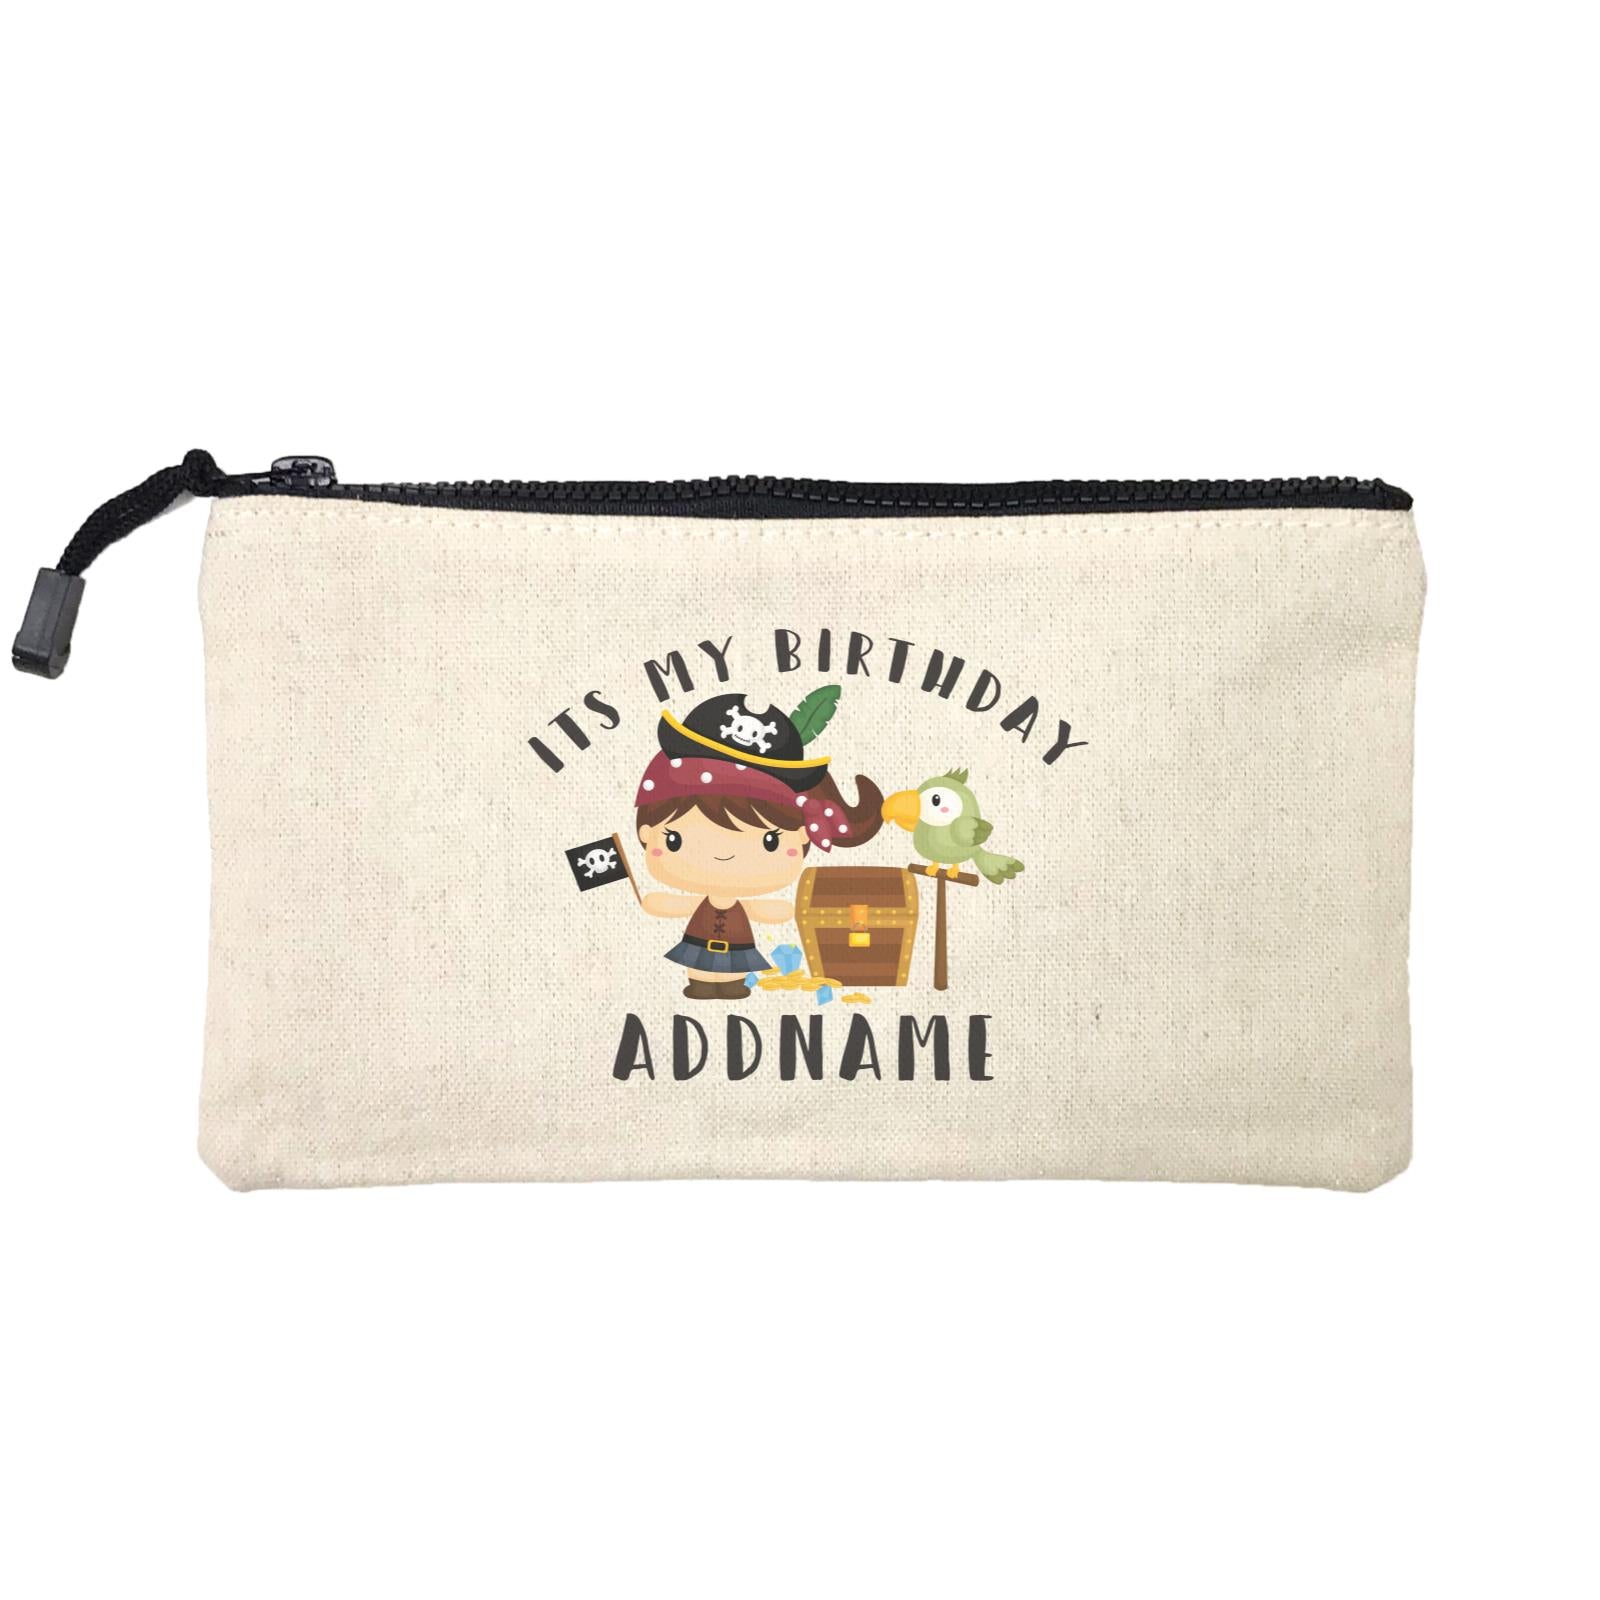 Birthday Pirate Happy Girl Captain With Treasure Chest Its My Birthday Addname Mini Accessories Stationery Pouch